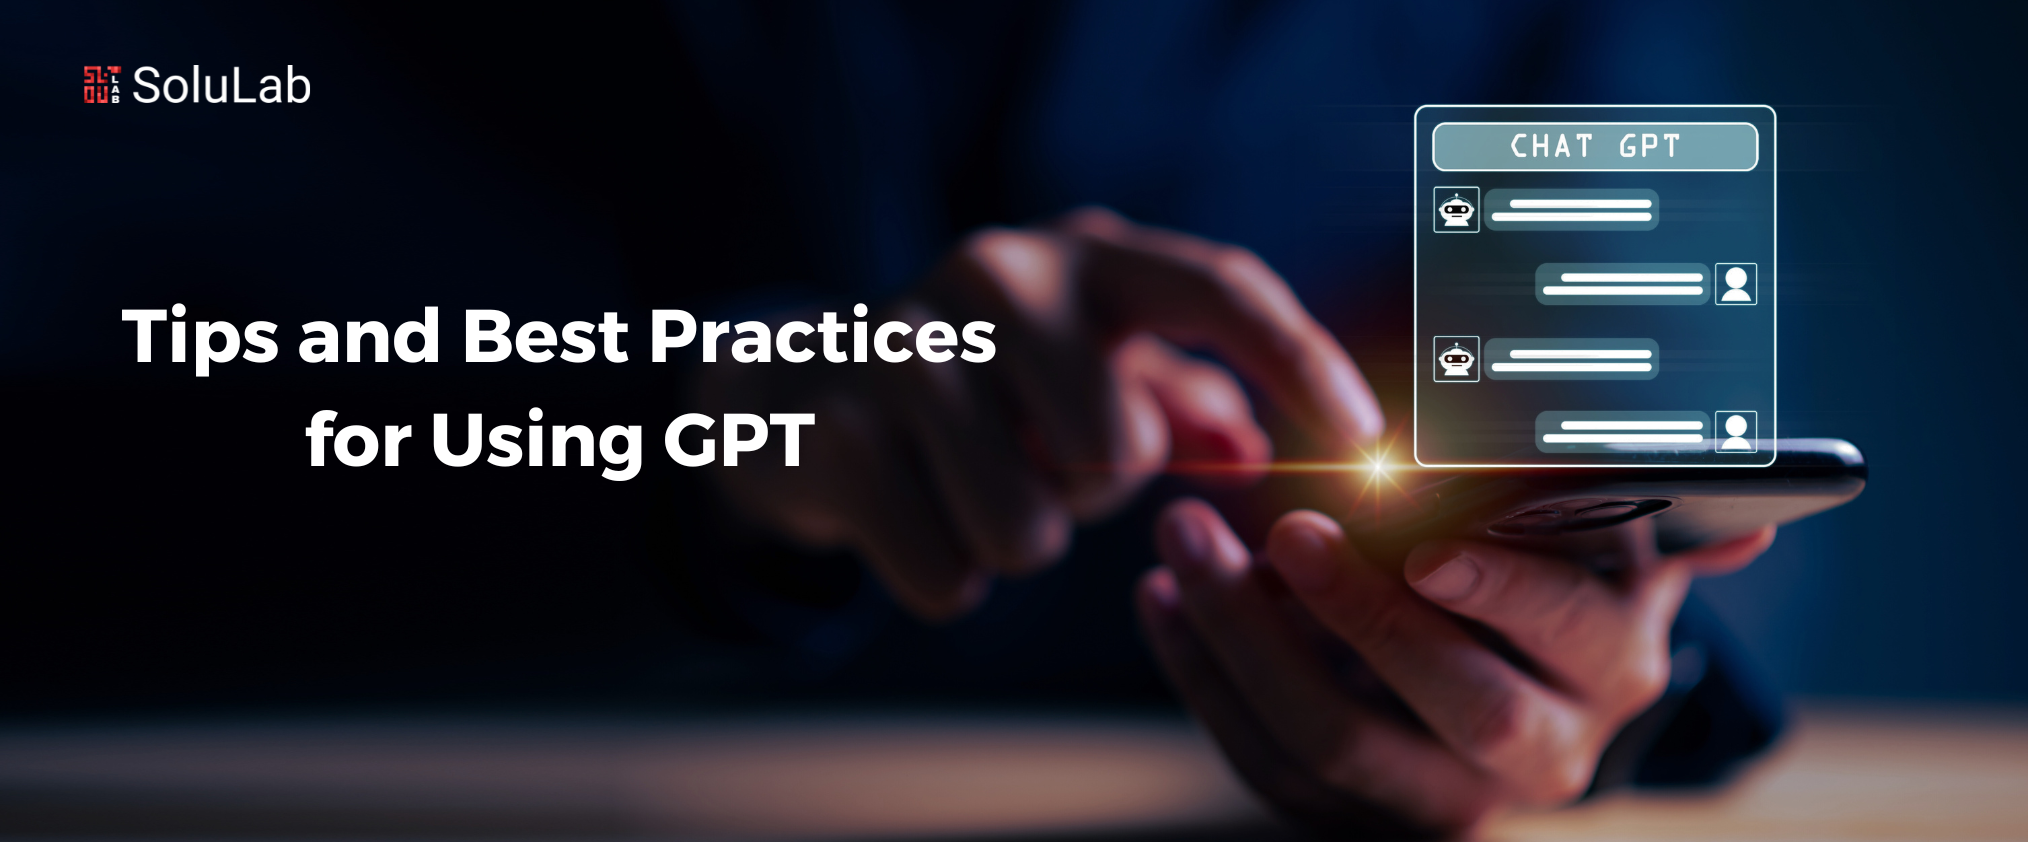 Tips and Best Practices for Using GPT